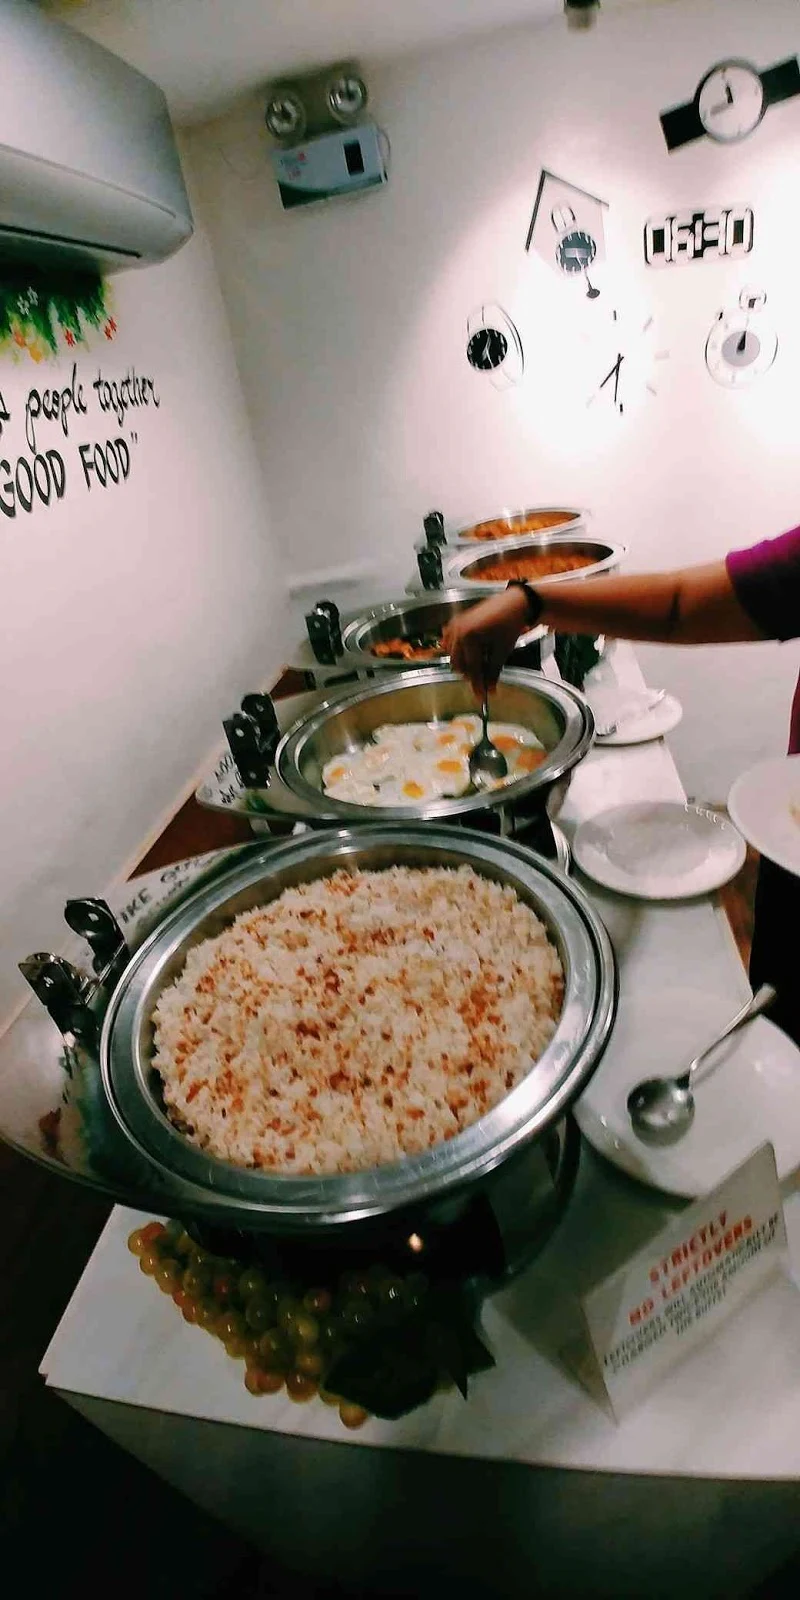 30 Buffet rice and eggs